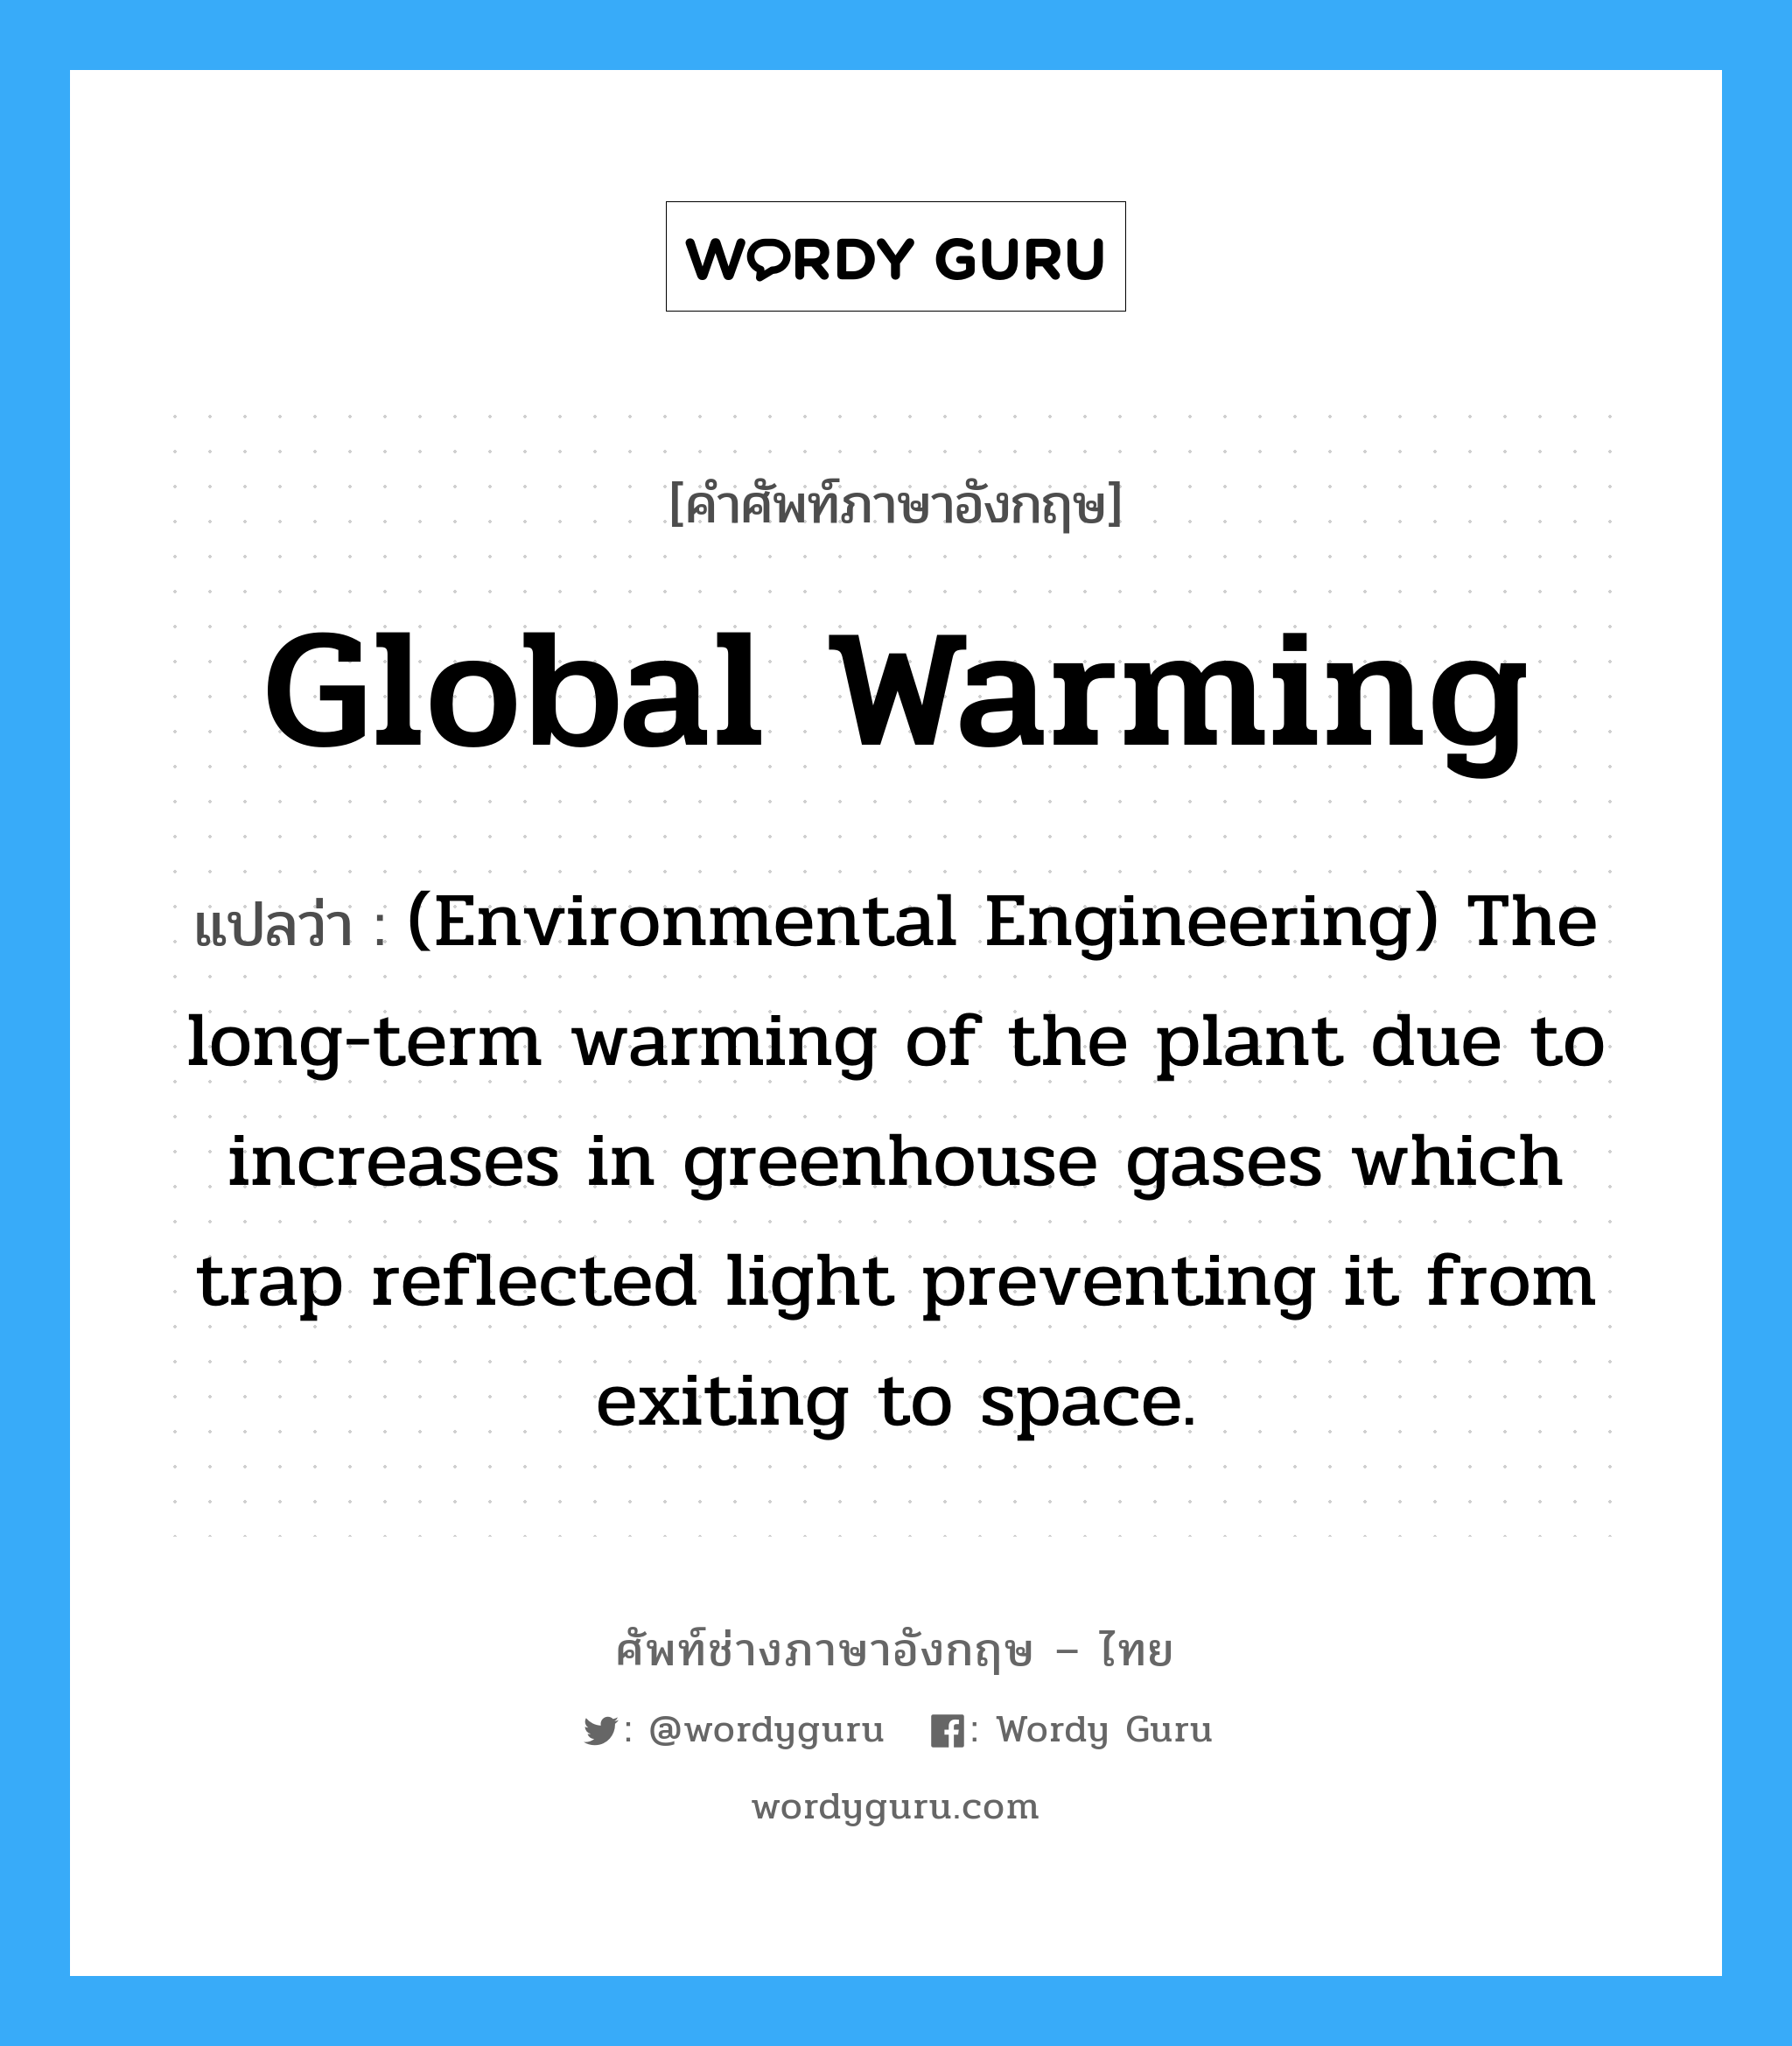 Global warming แปลว่า?, คำศัพท์ช่างภาษาอังกฤษ - ไทย Global warming คำศัพท์ภาษาอังกฤษ Global warming แปลว่า (Environmental Engineering) The long-term warming of the plant due to increases in greenhouse gases which trap reflected light preventing it from exiting to space.